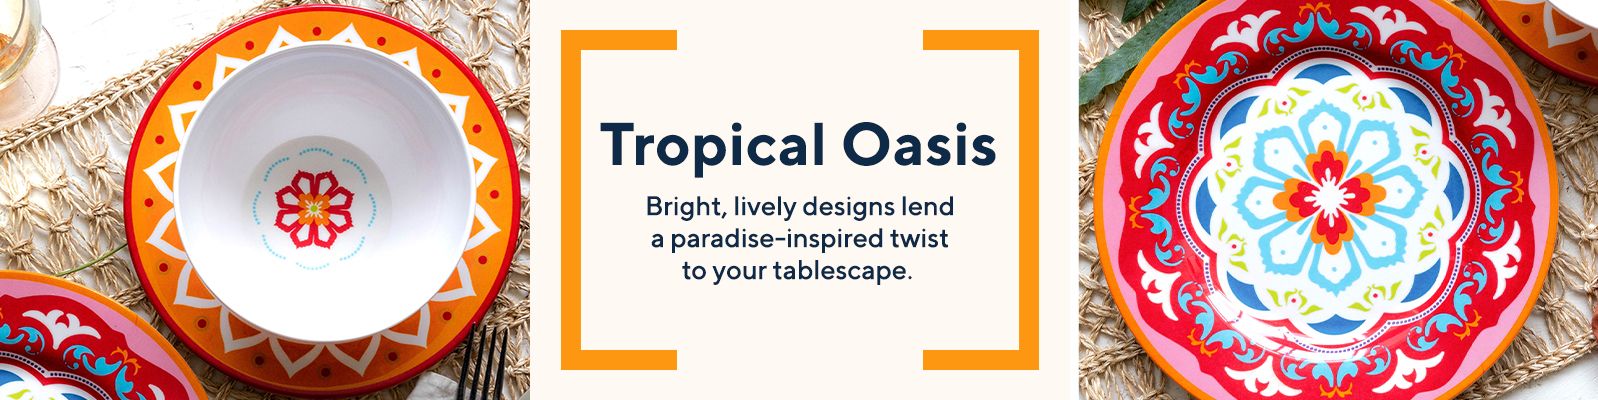 Tropical Oasis  Bright, lively designs lend a paradise-inspired twist to your tablescape. 